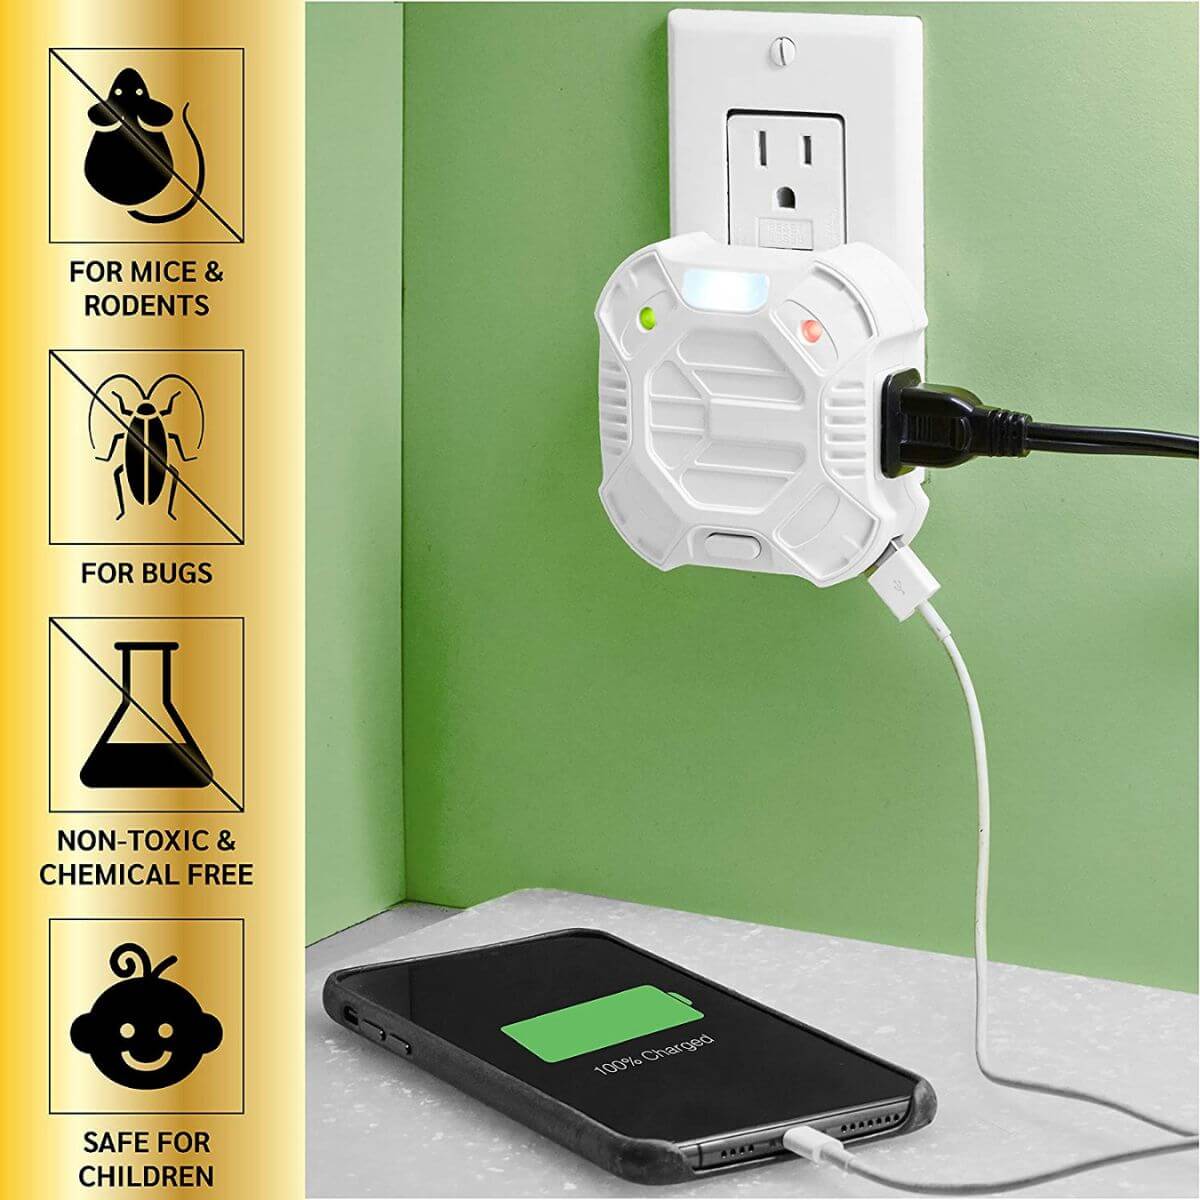 Riddex X Ultrasonic Pest Repeller plugged into wall with extra outlets for a plug and charging a phone (via USB-A)